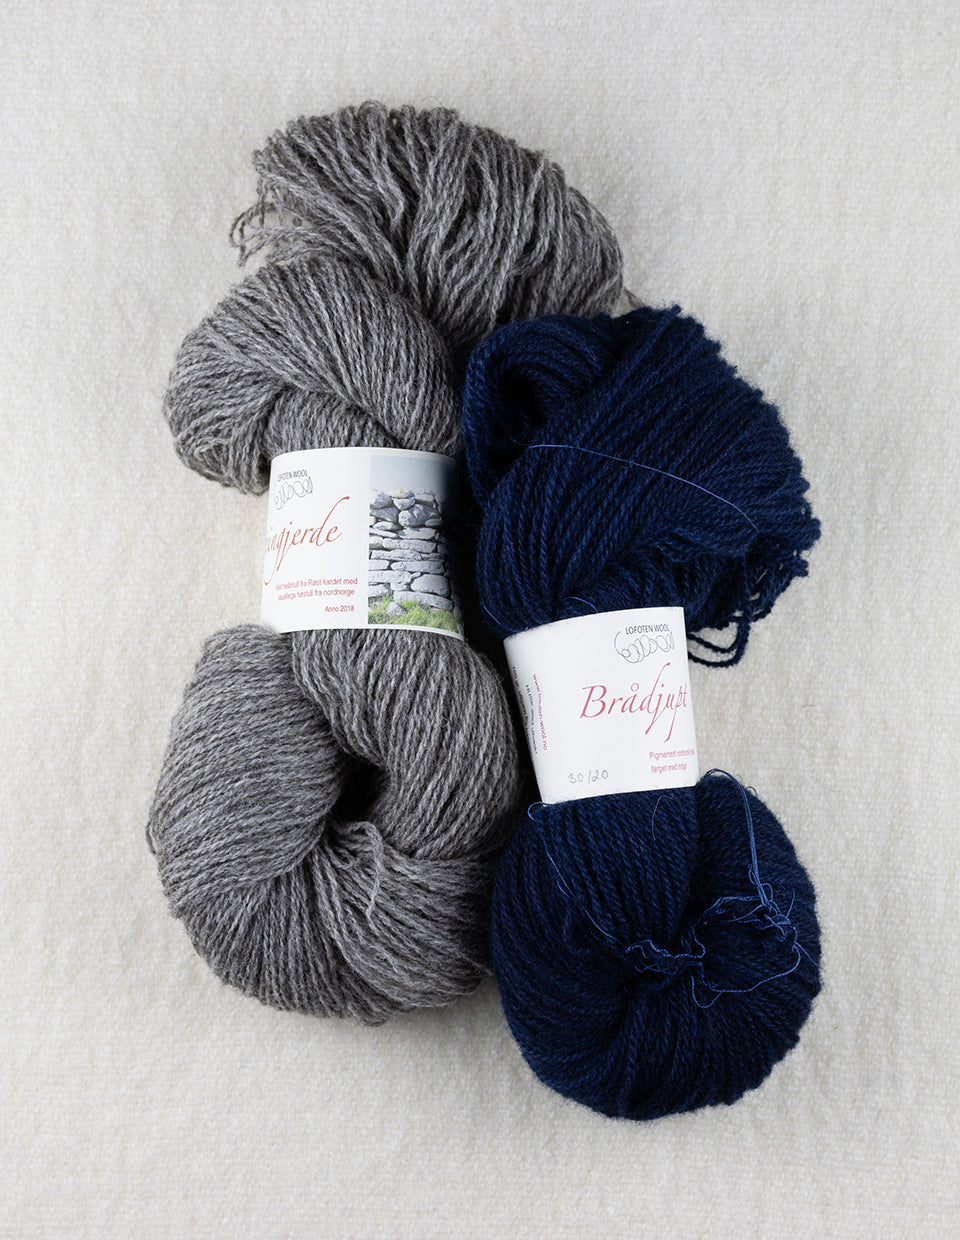 Markens Grøde (The crop of the Field) 2 ply plant dyed knitting kit